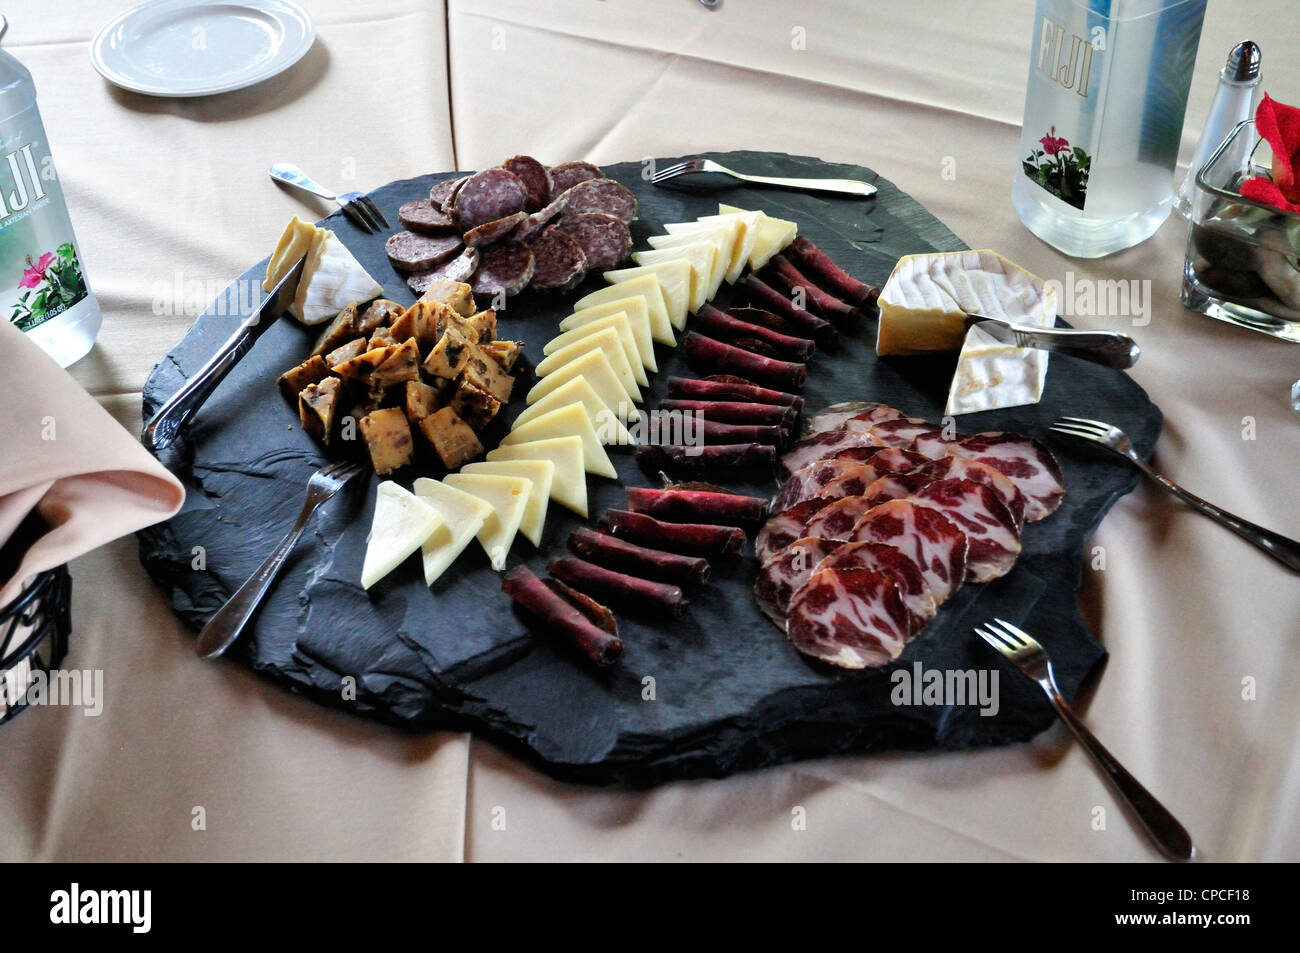 A plate containing cheeses and cold cuts, part of a lunch serving at Café Champagne Stock Photo